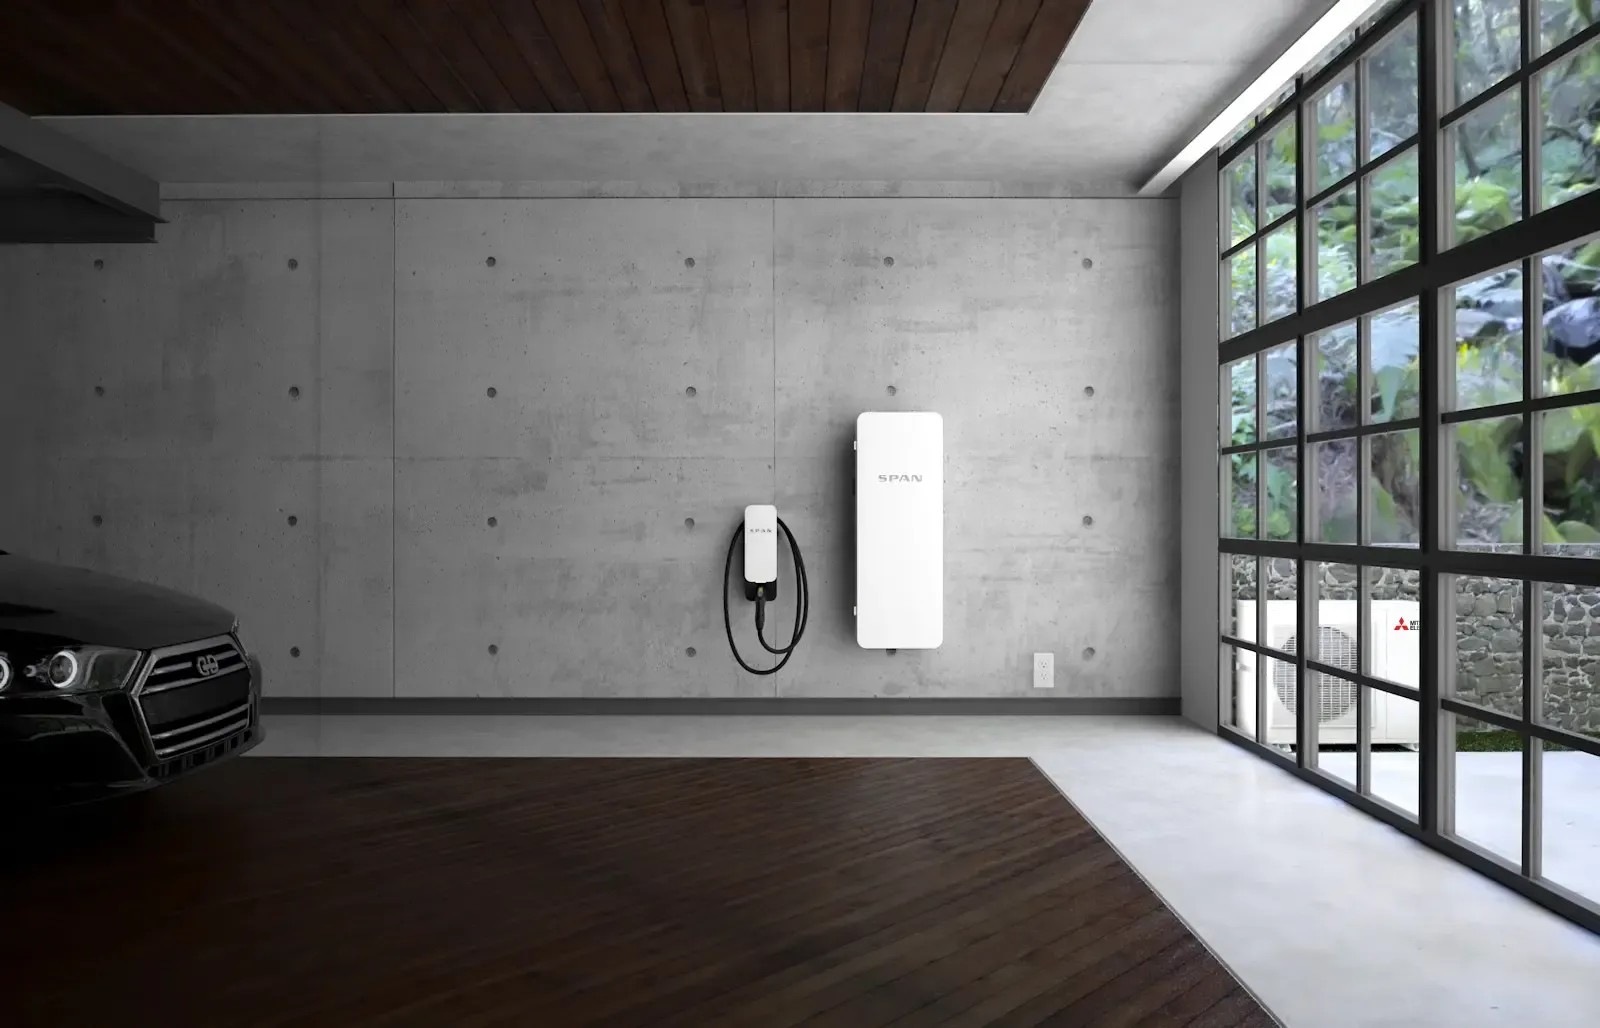 METUS Collaborates with SPAN to Accelerate Home Electrification room indoors family inside contemporary house window wall door wood architecture light home apartment